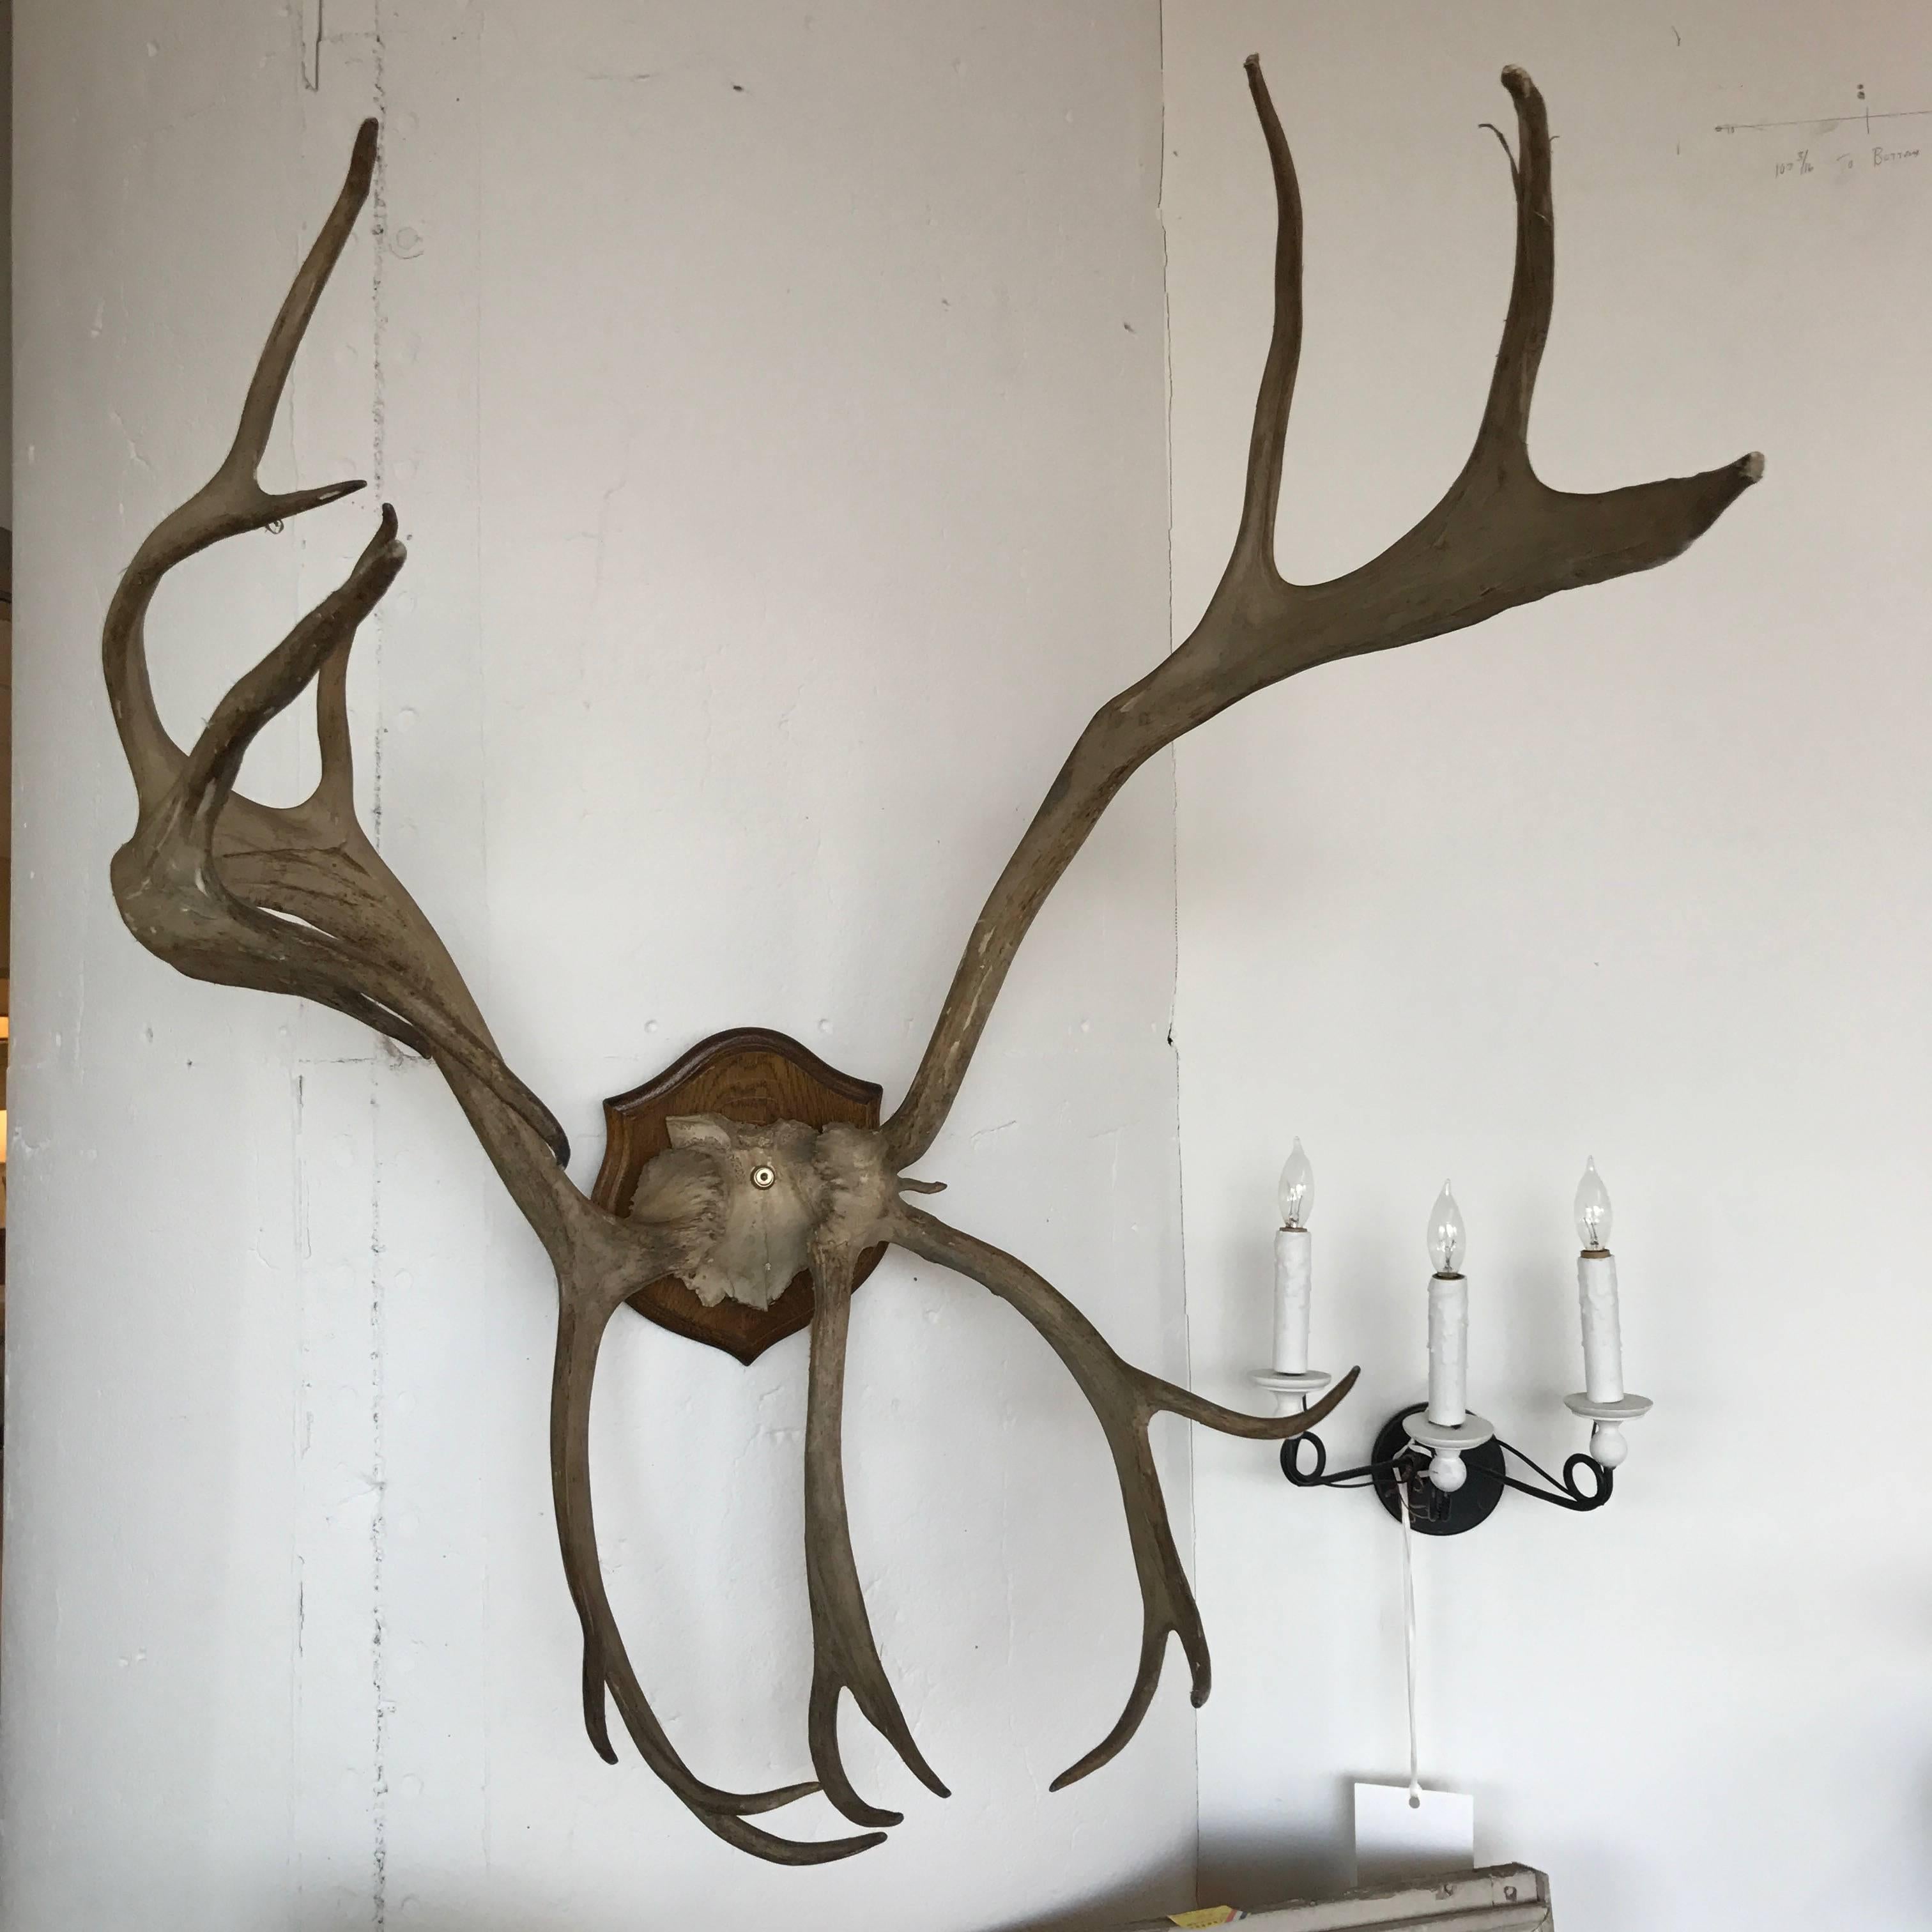 19th century Mounted Antlers.